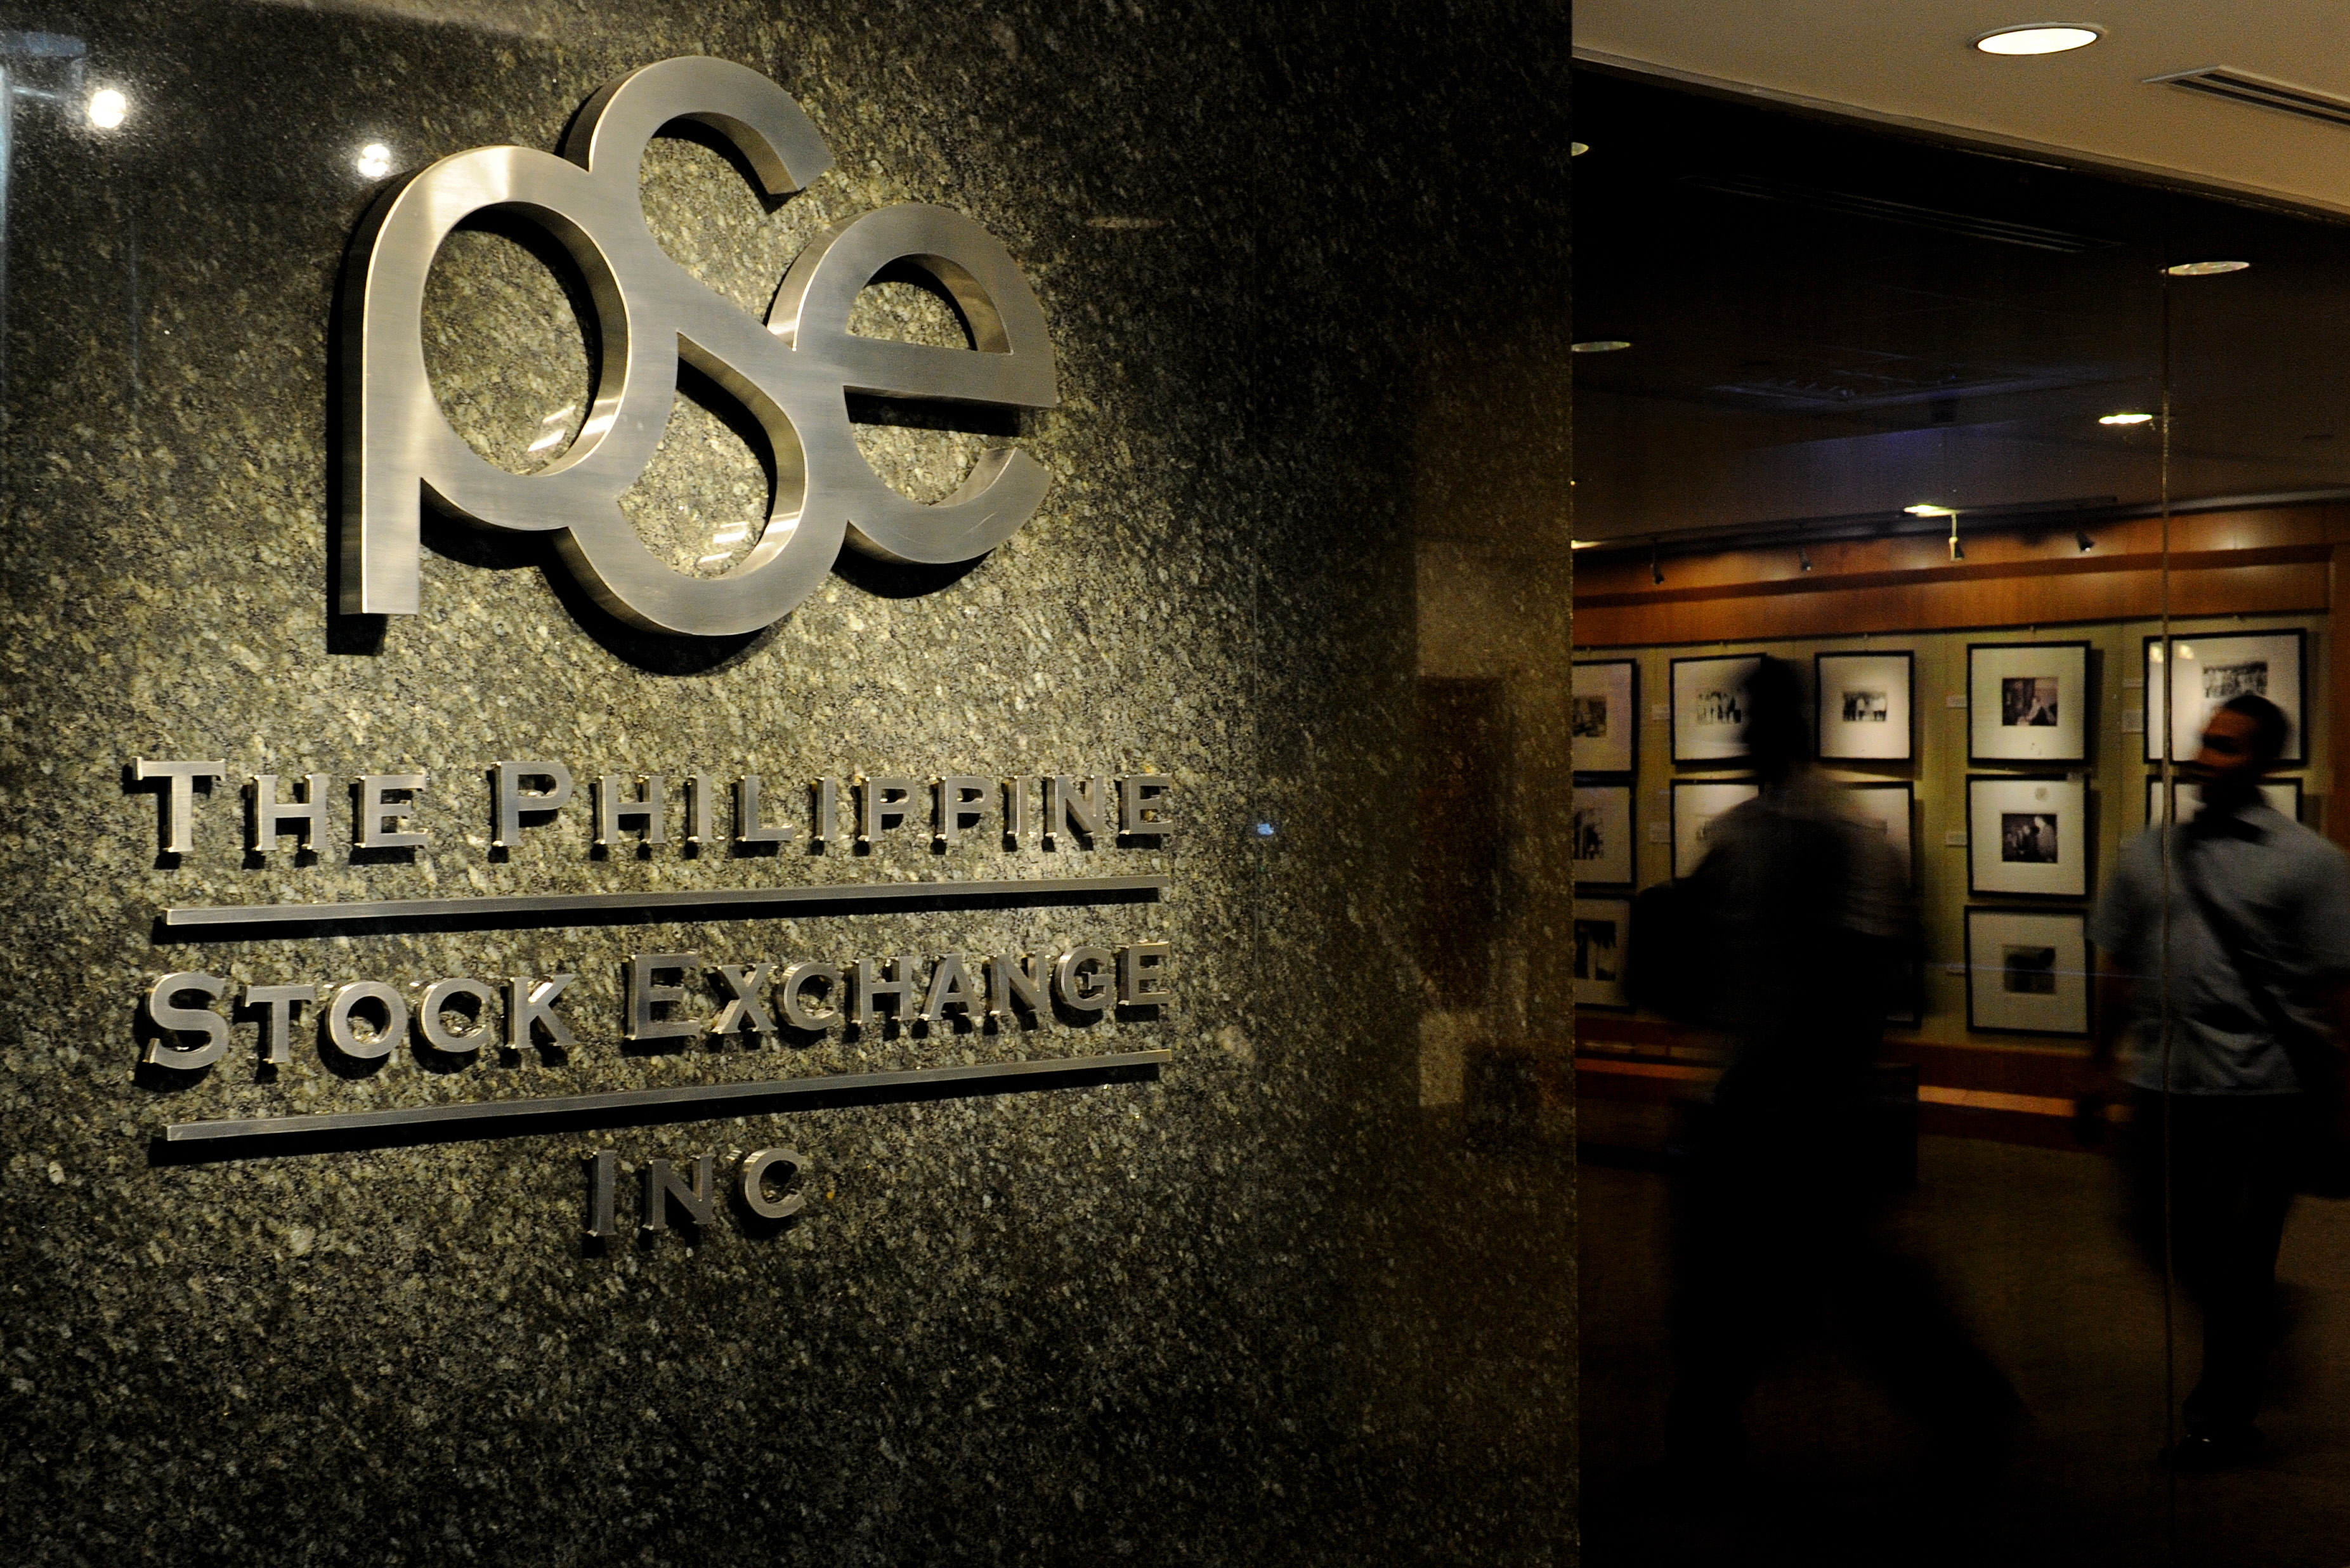 Bloomberry in, Petron out of Philippine Stock Exchange index